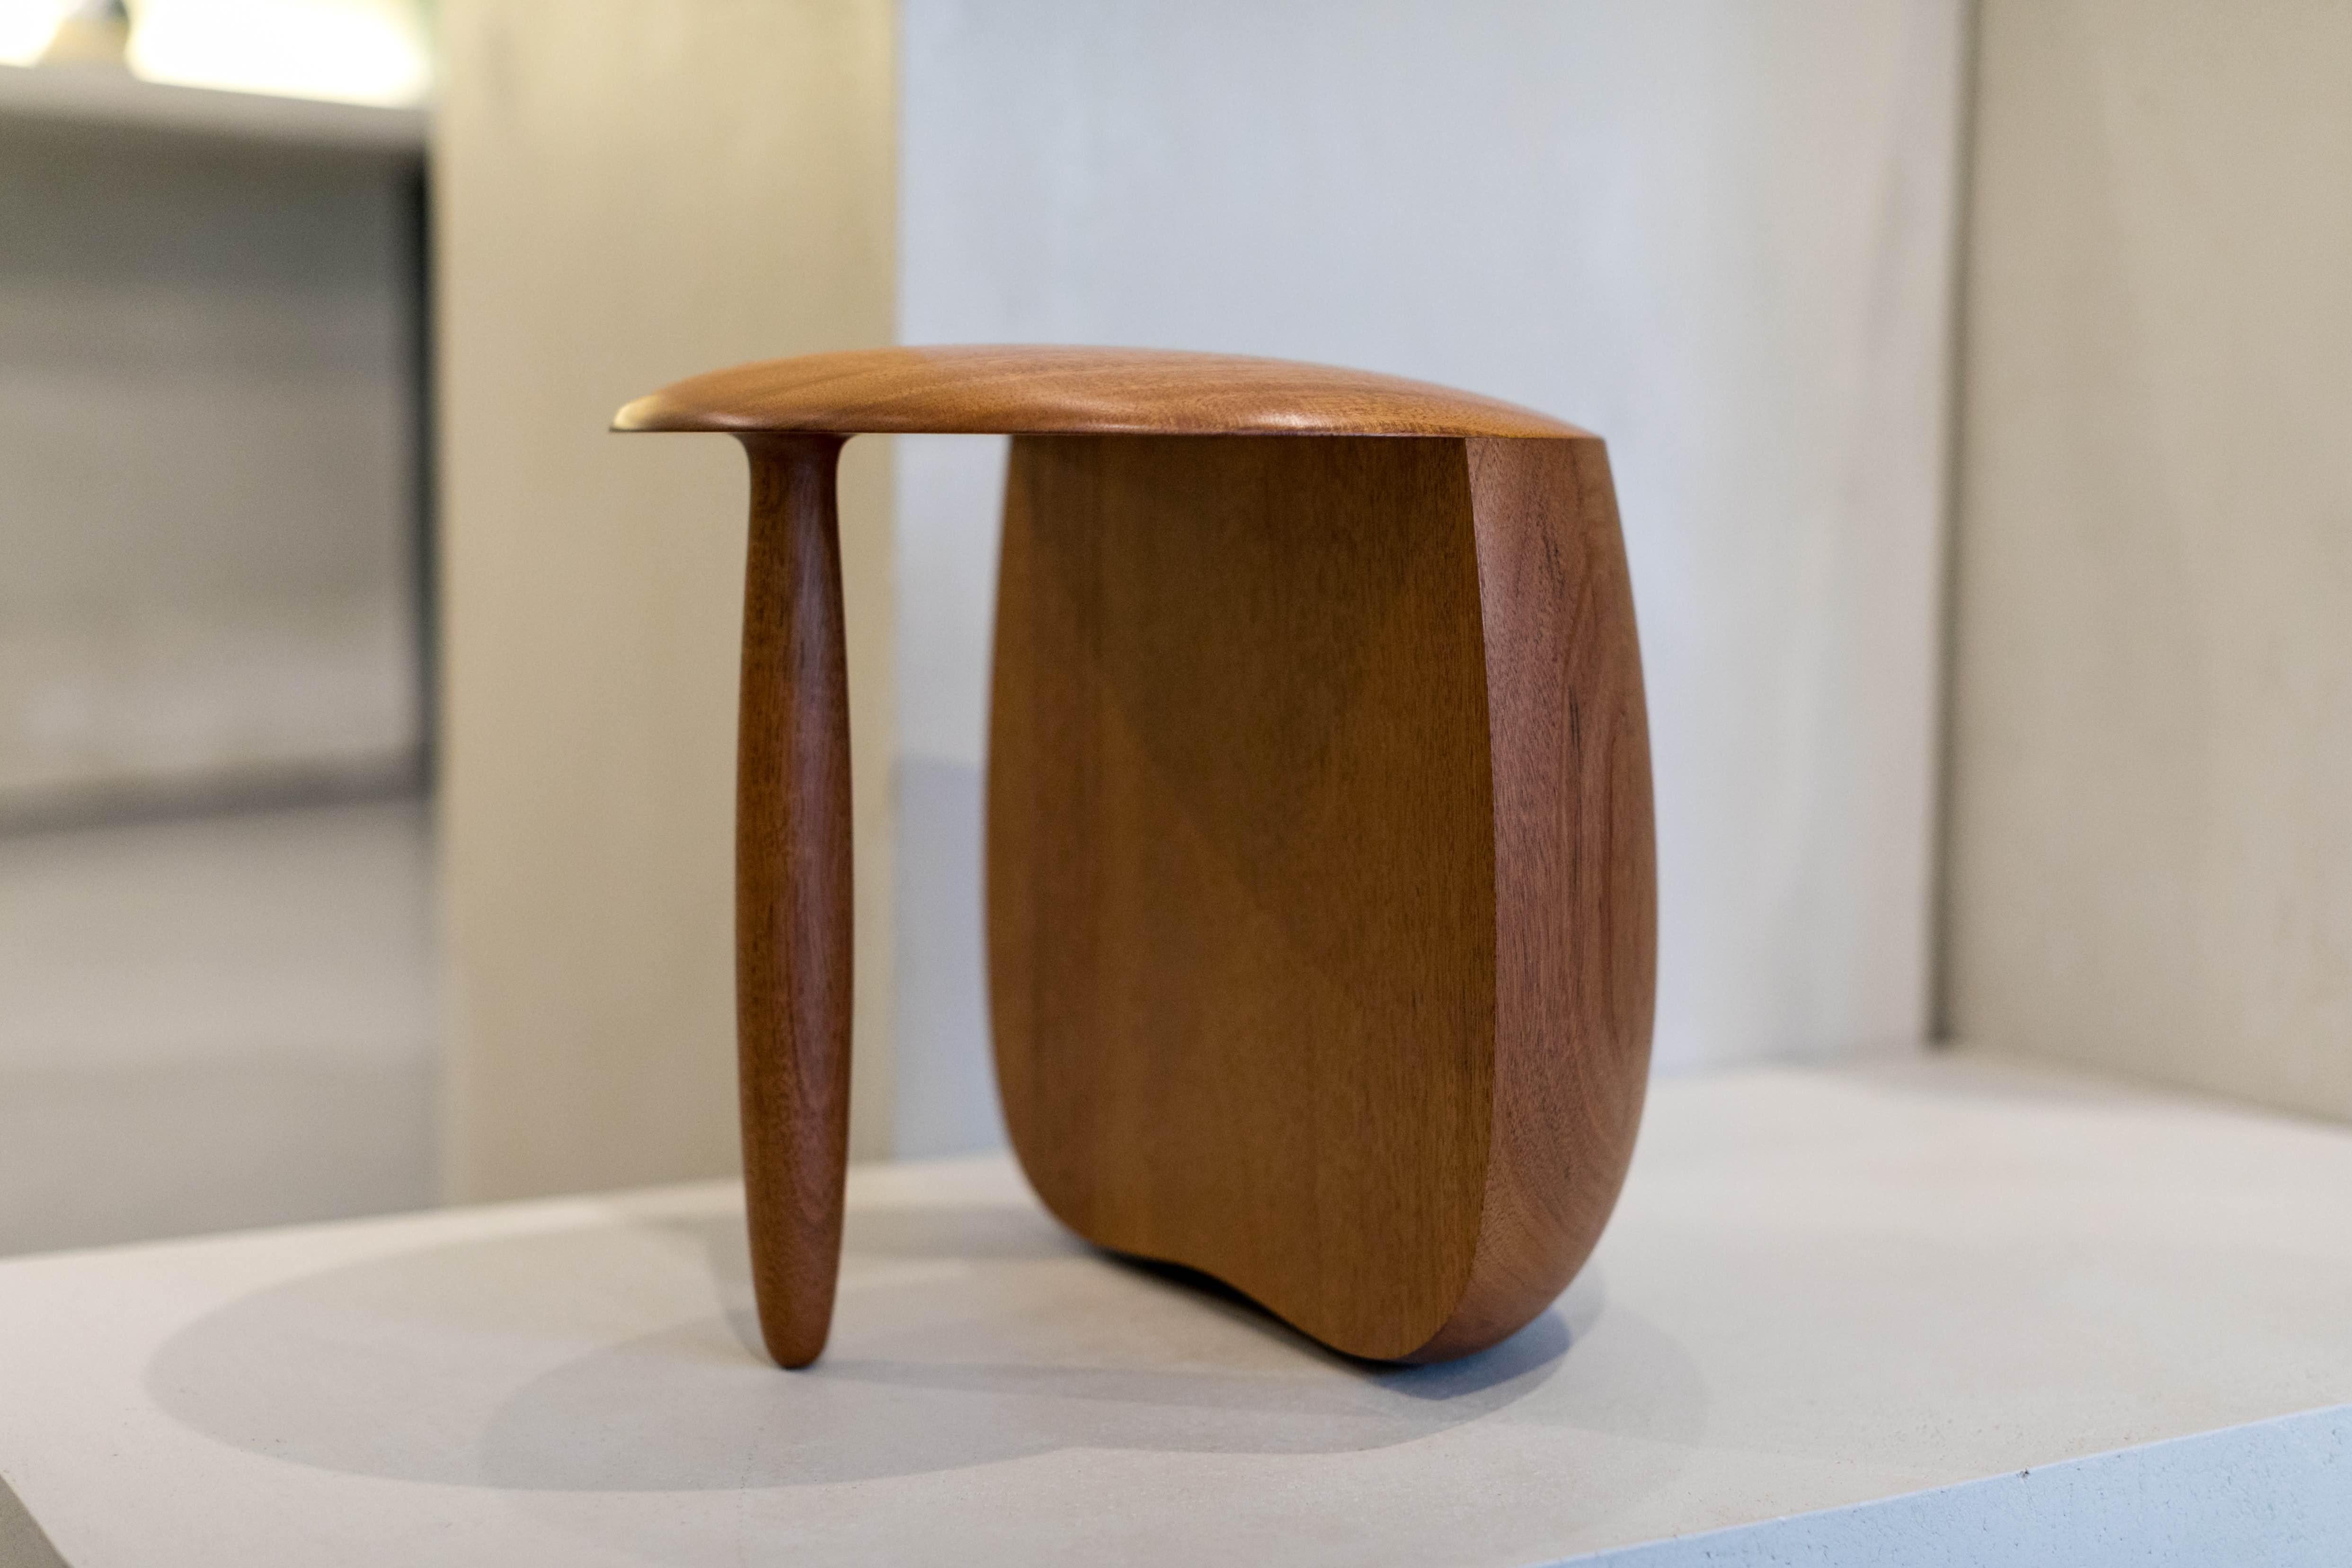 Museum collections

Stedelijk Museum Amsterdam

Description
Originally created in 2006 with Urushi Master Sergej Kirilov as a limited edition of 7 lacquered stools, an edition of 12 was introduced in 2010 in lacquered mahogany wood. Both